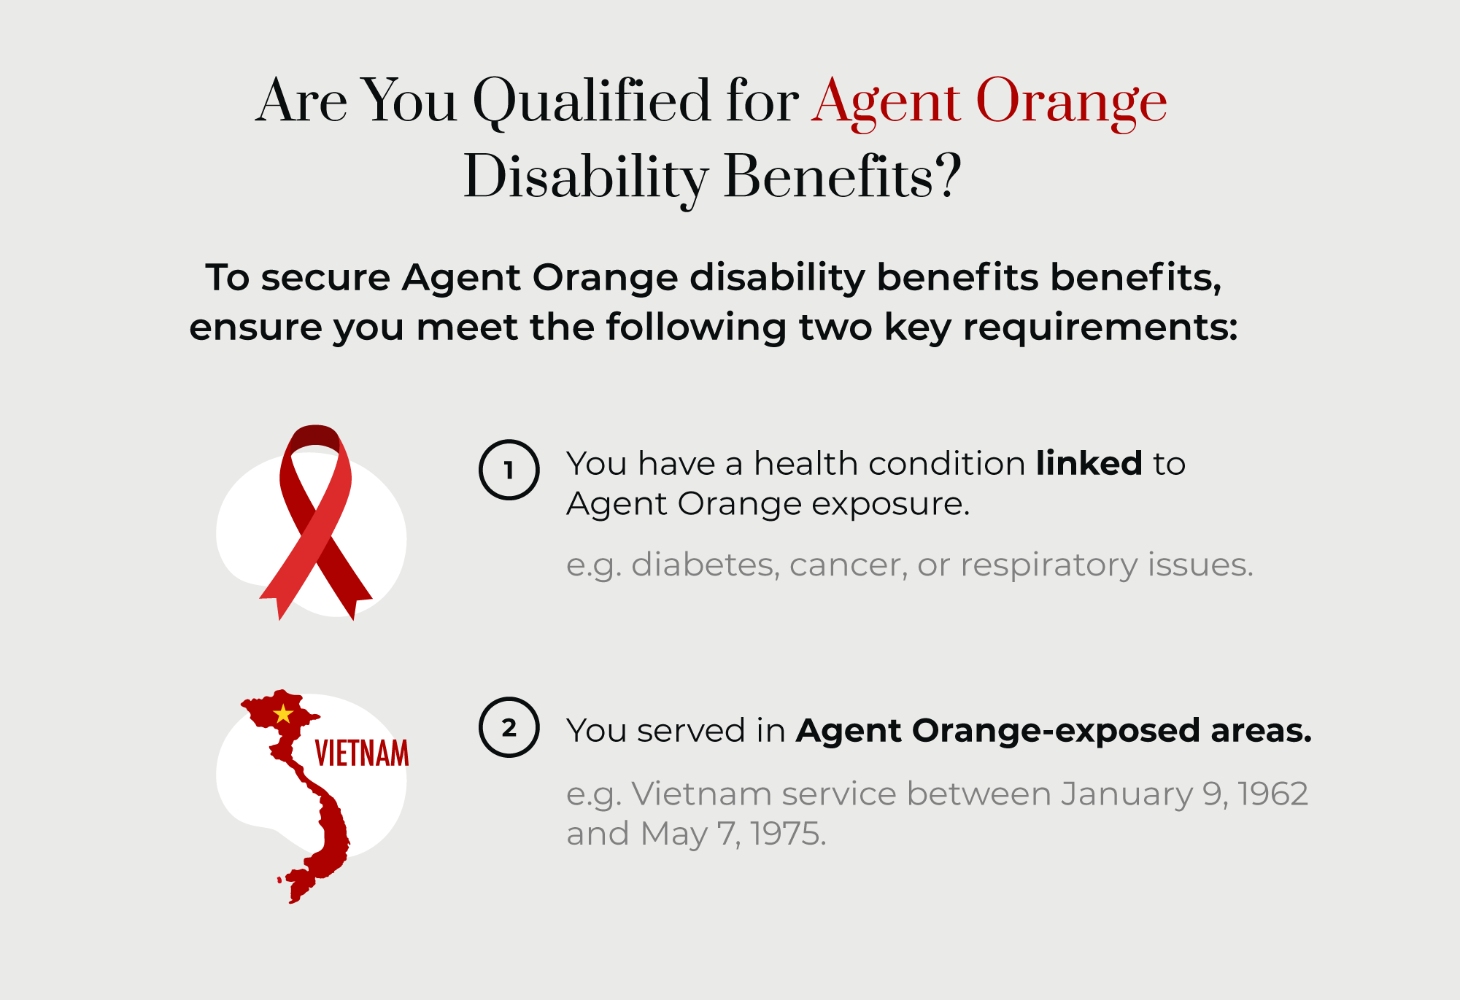 Are you qualified for agent orange disability benefits?